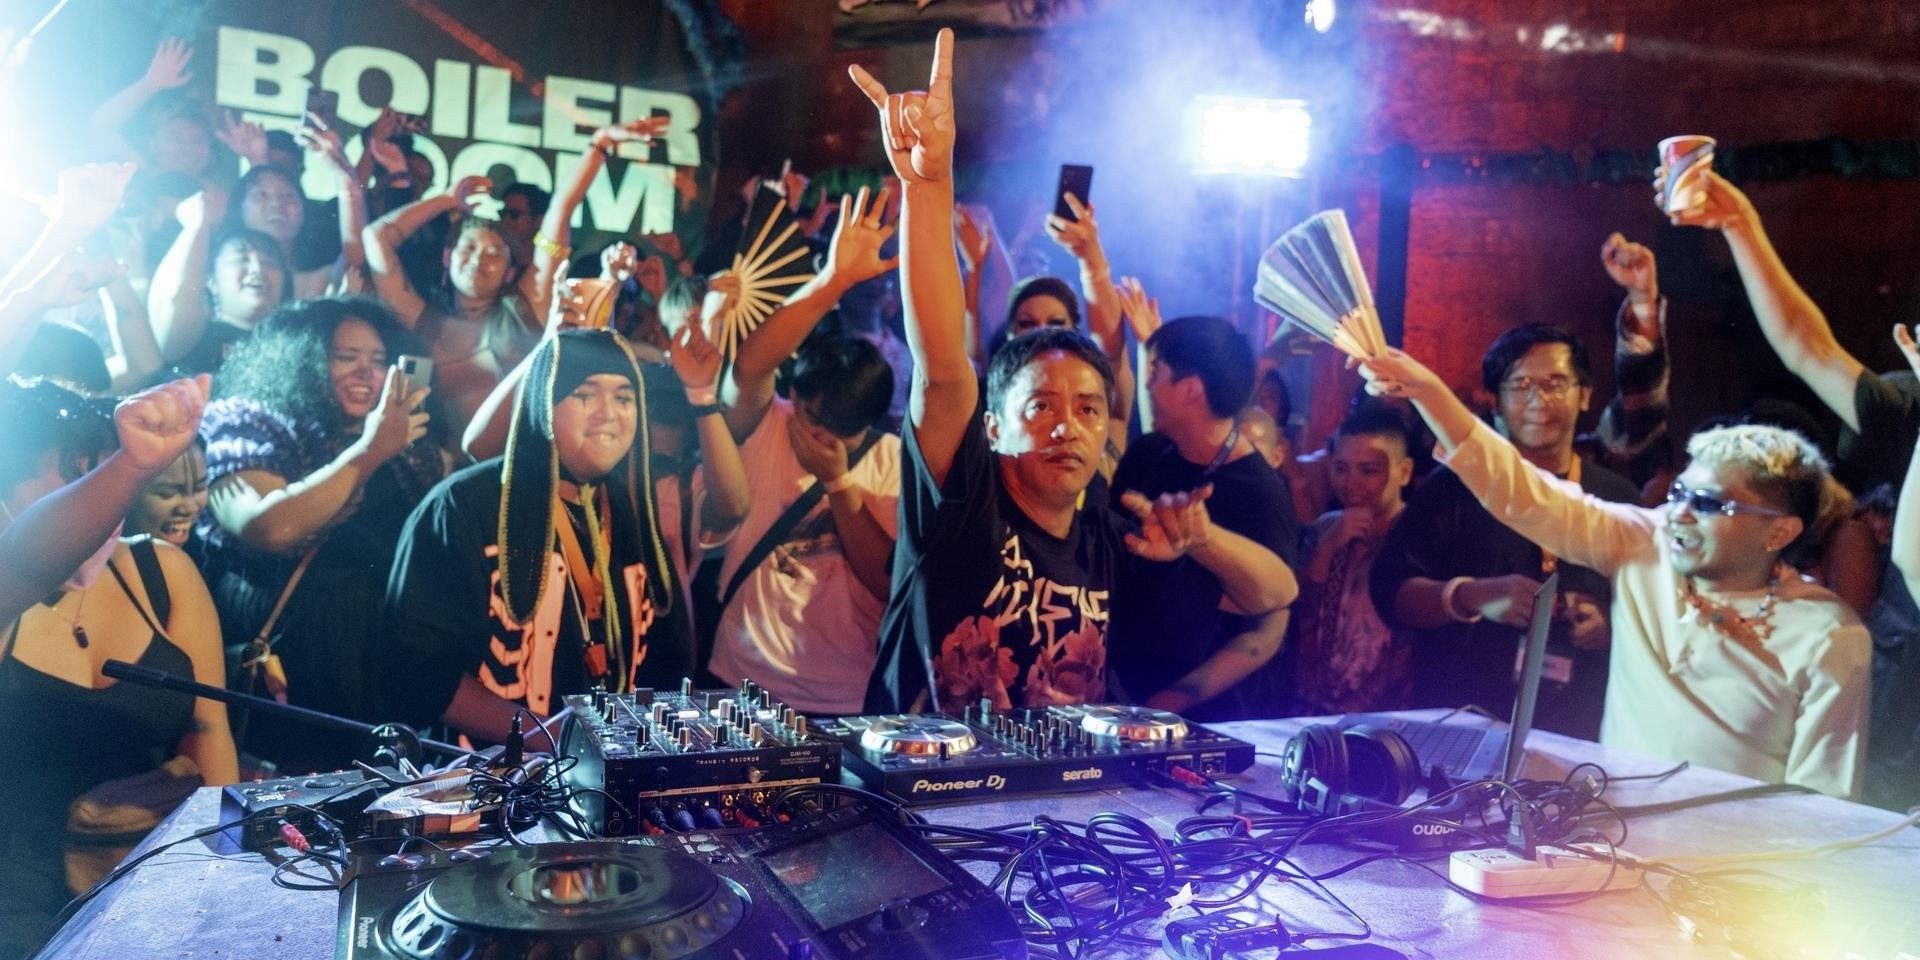 Here's how you can watch Manila Community Radio's budots showcase on Boiler Room